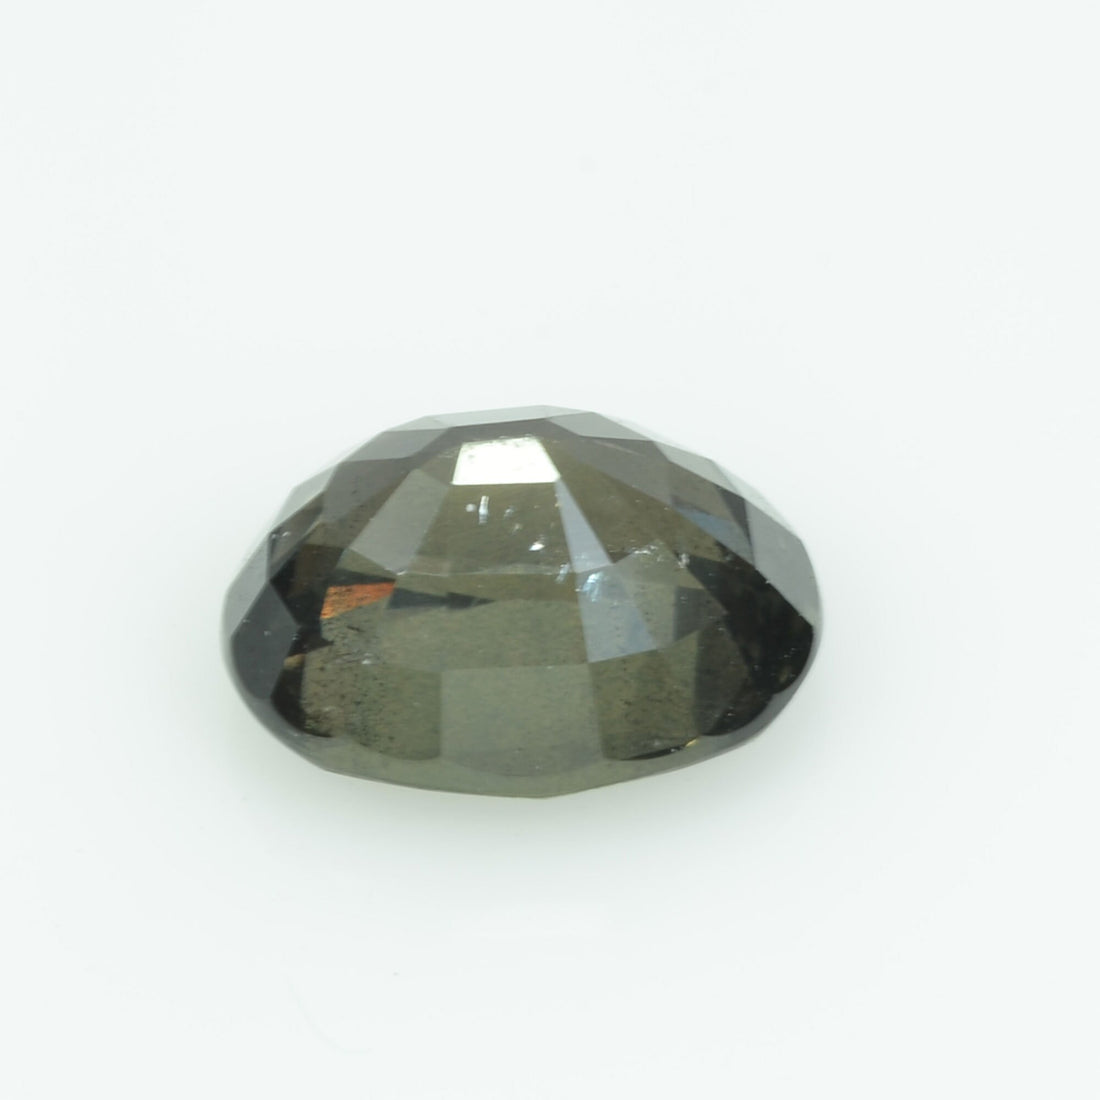 4.06 Cts Natural Bi-color Sapphire Loose Gemstone Oval Cut